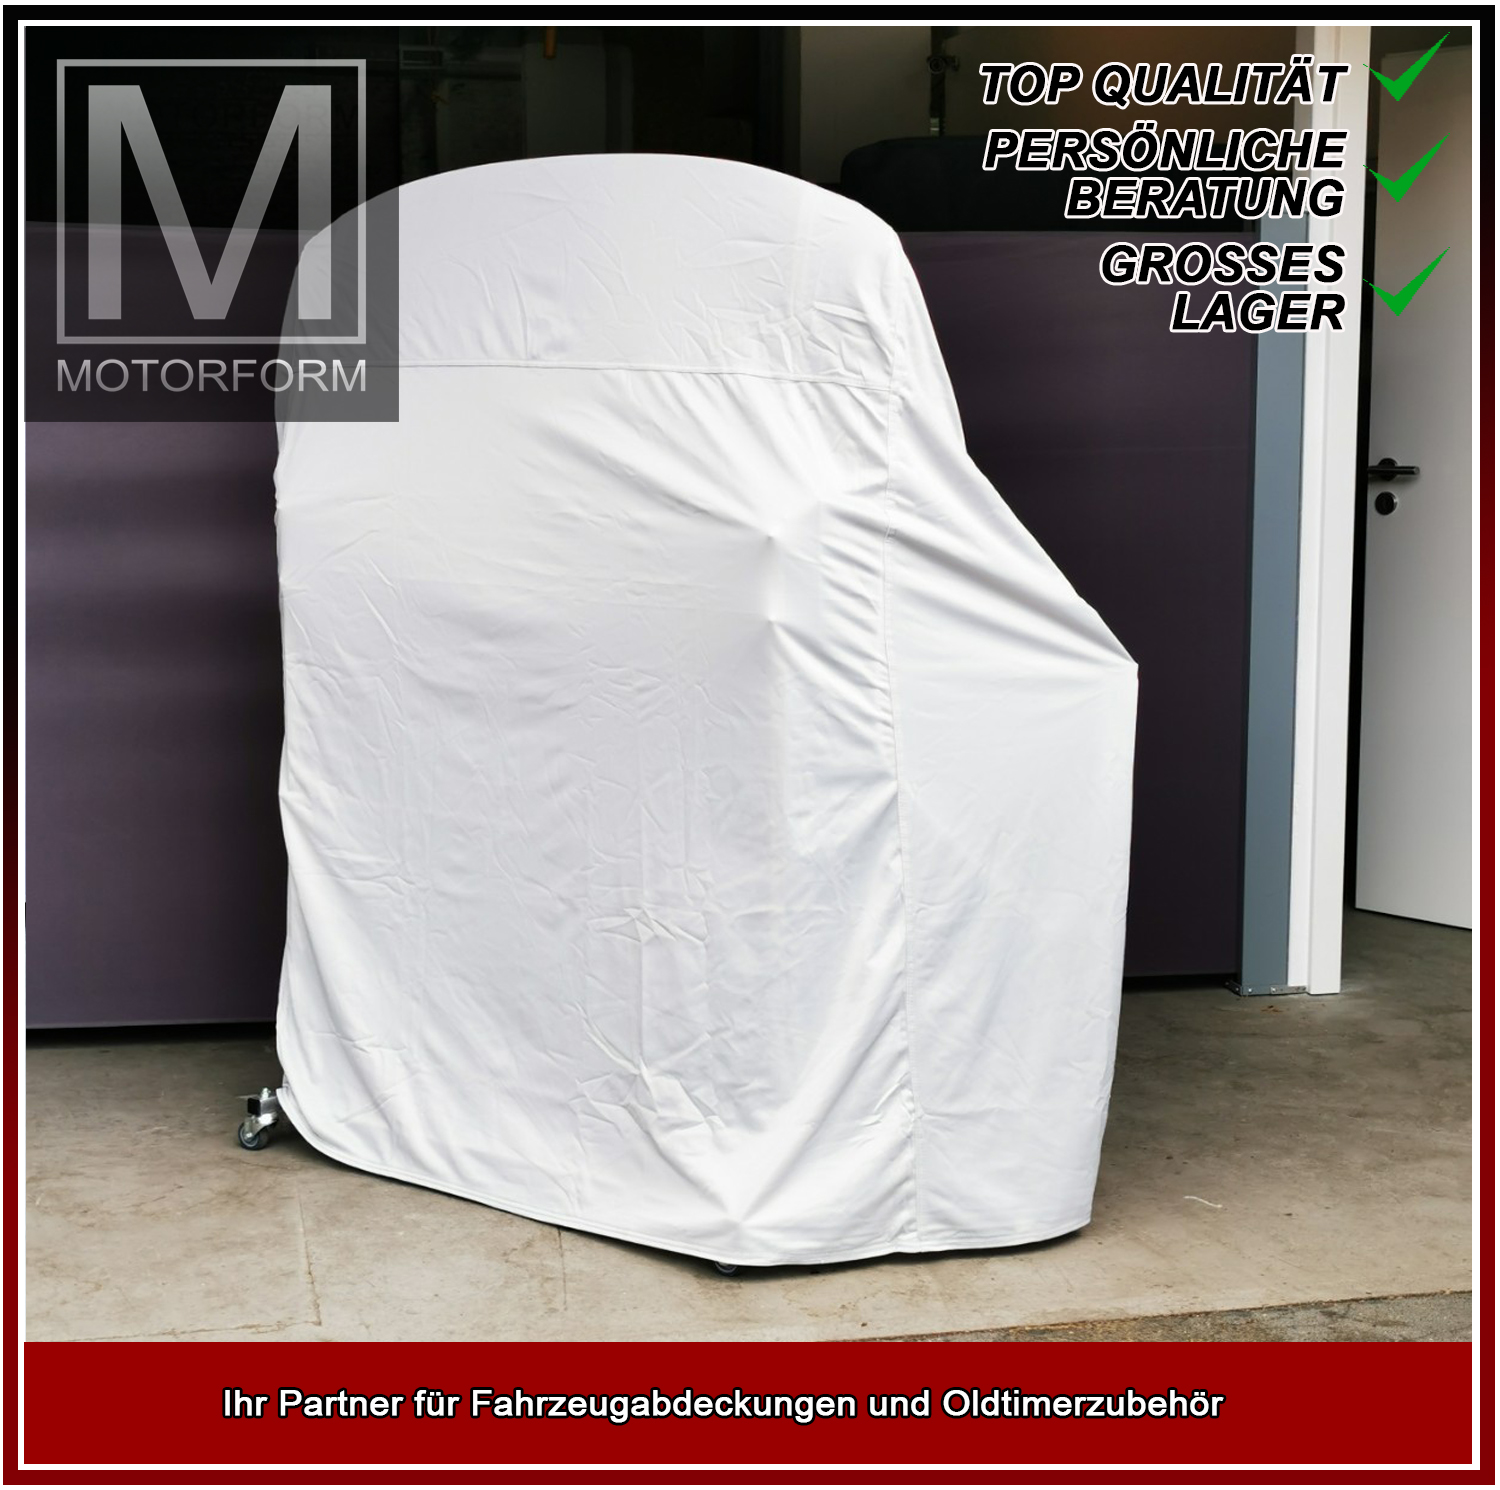 Silver Series Hardtop-Cover for Mercedes SL-Class W198 II 300SL 